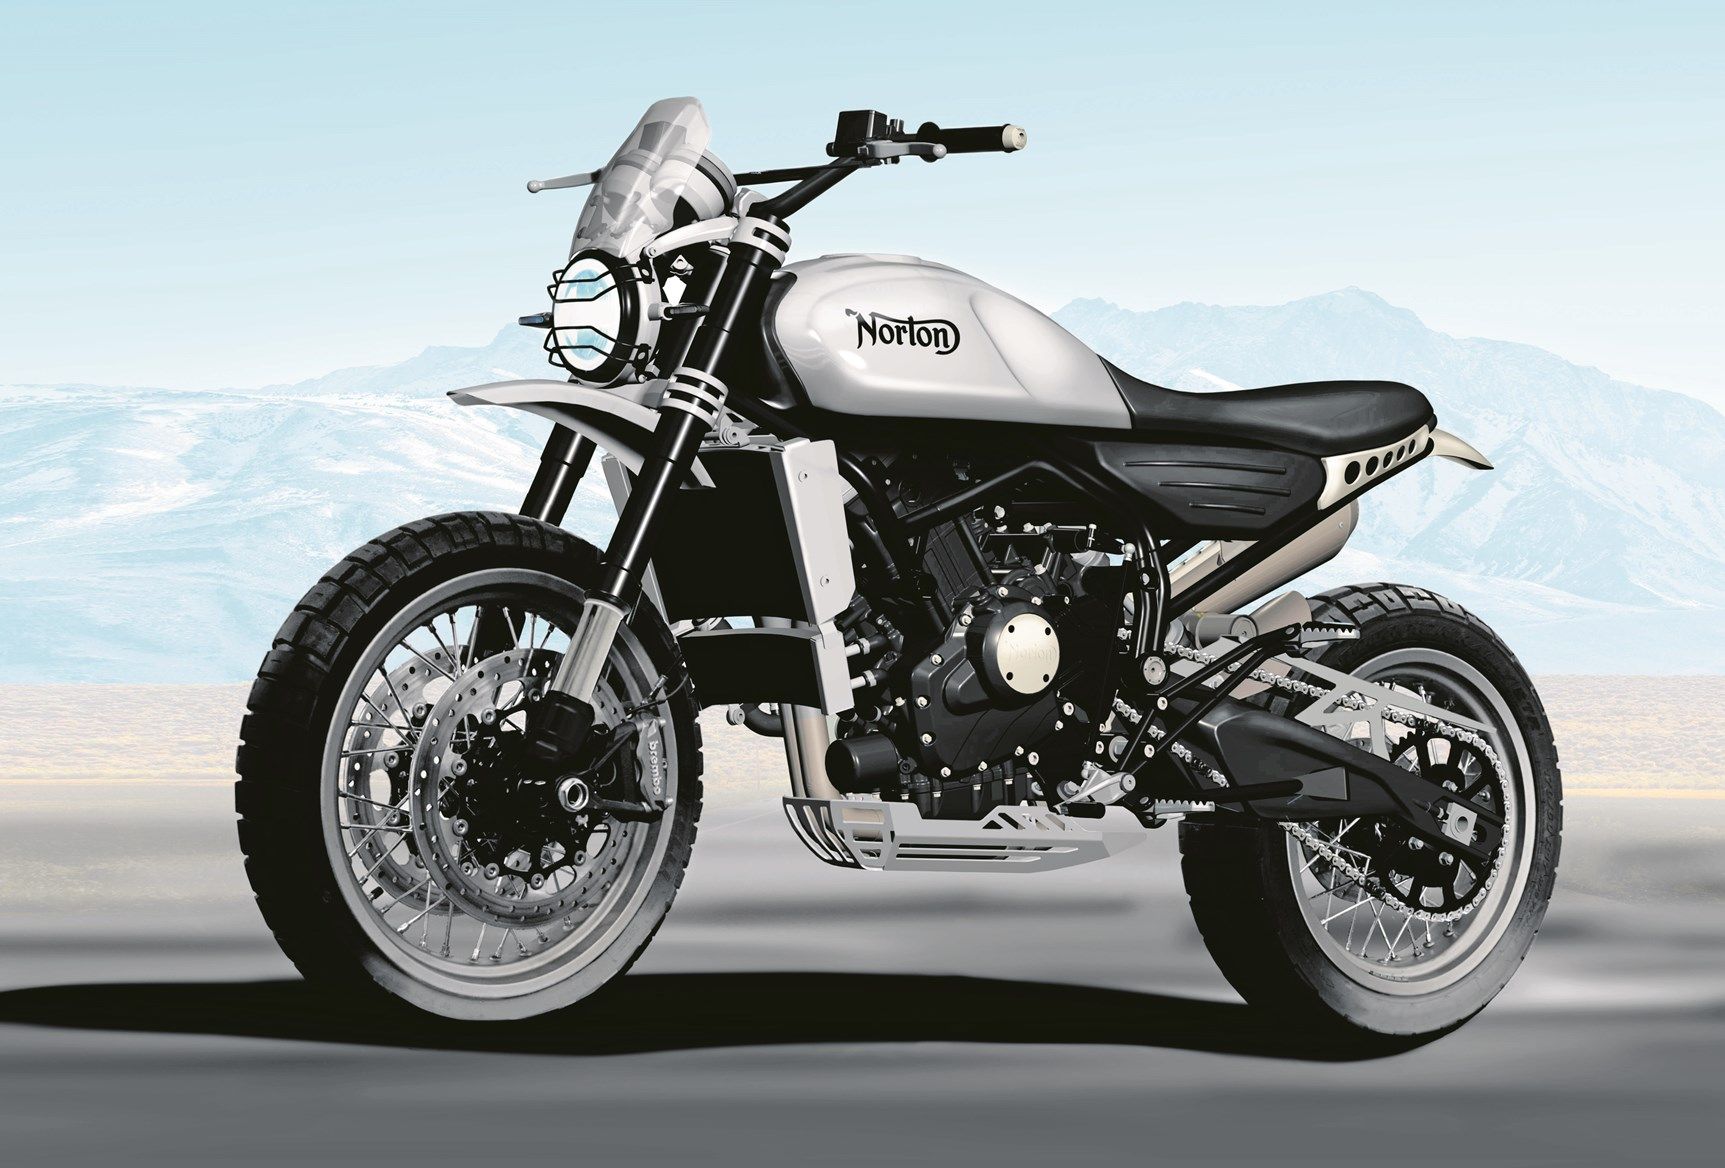 Norton Motorcycles CEO reveals the final rendering for their upcoming motorcycle